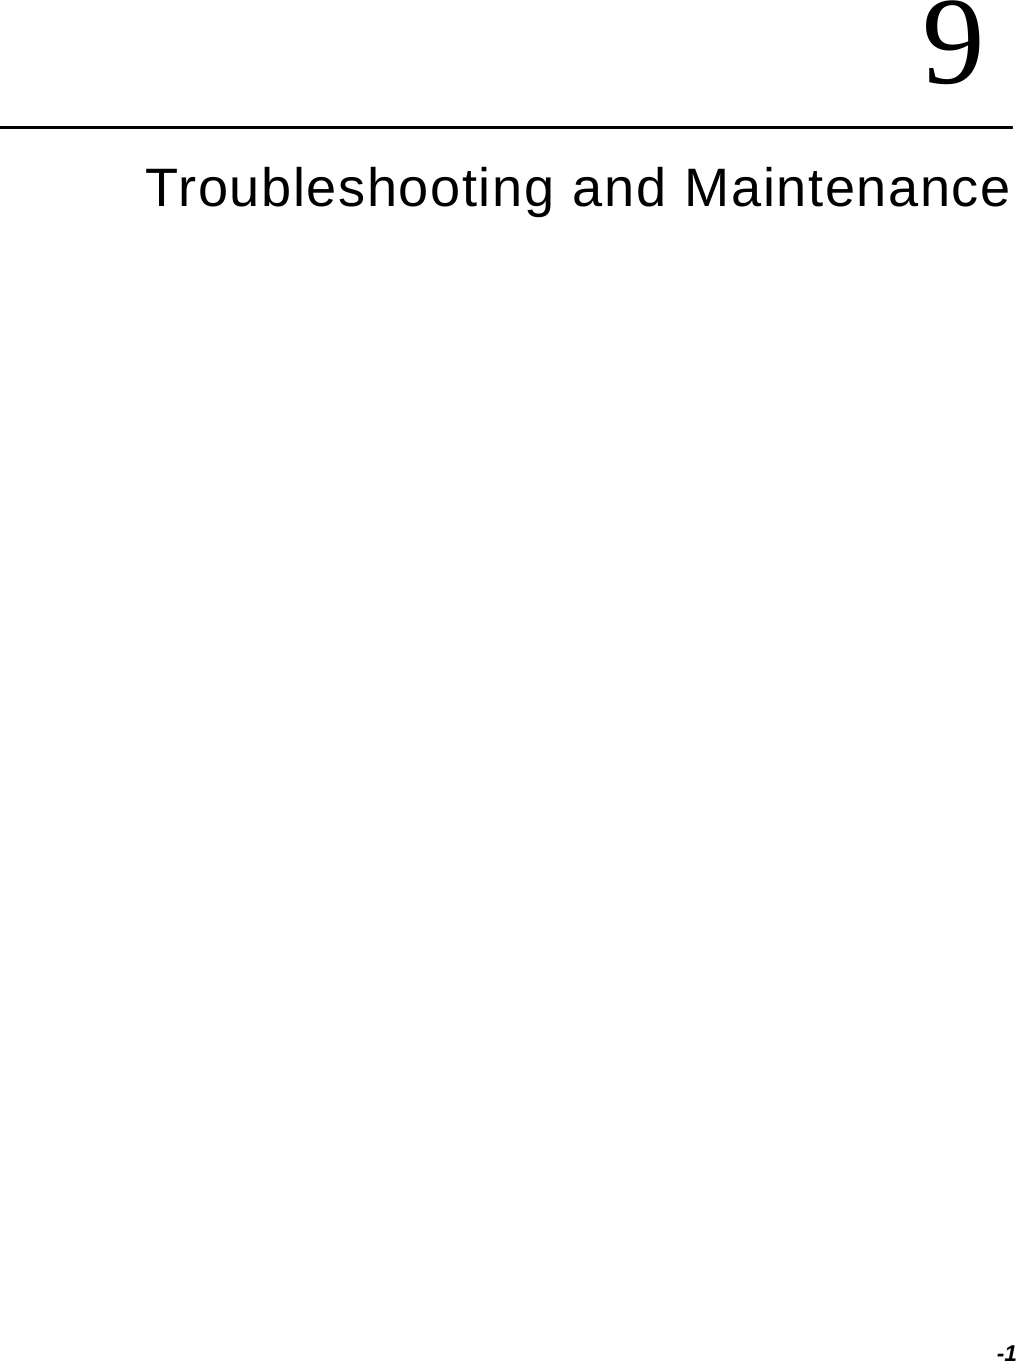 -19Troubleshooting and Maintenance